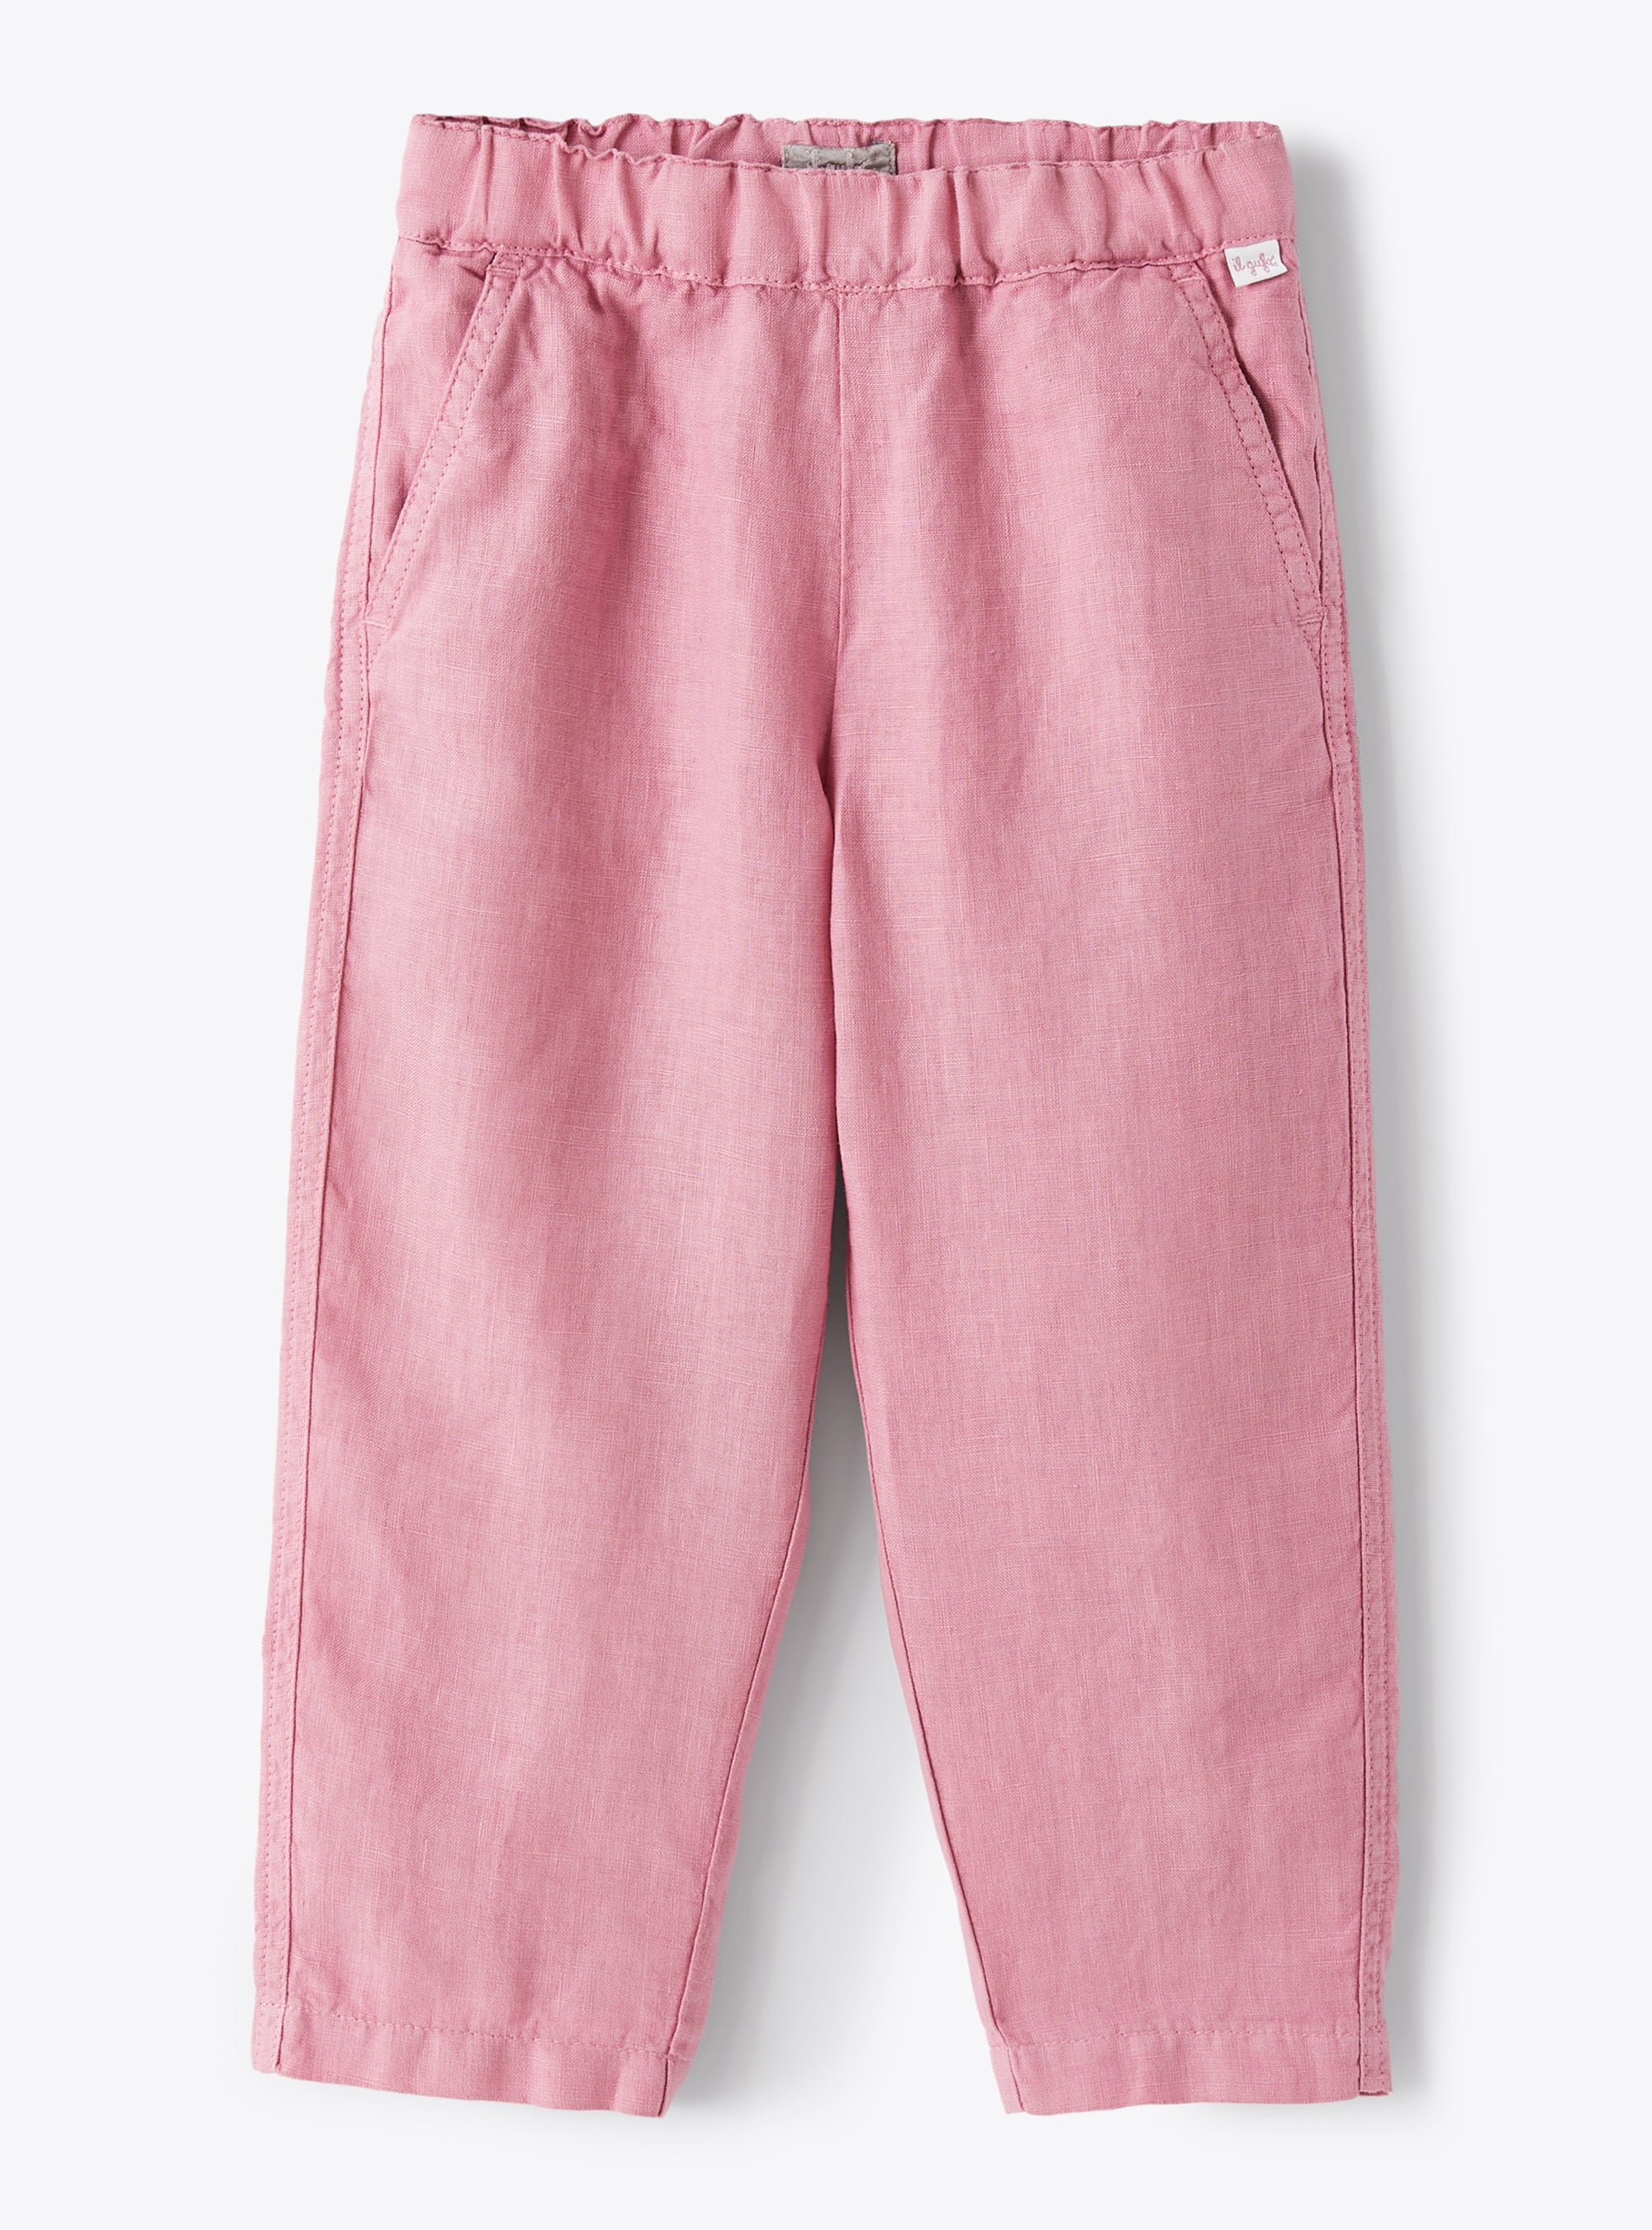 Long drawstring trousers in pink linen - Trousers - Il Gufo